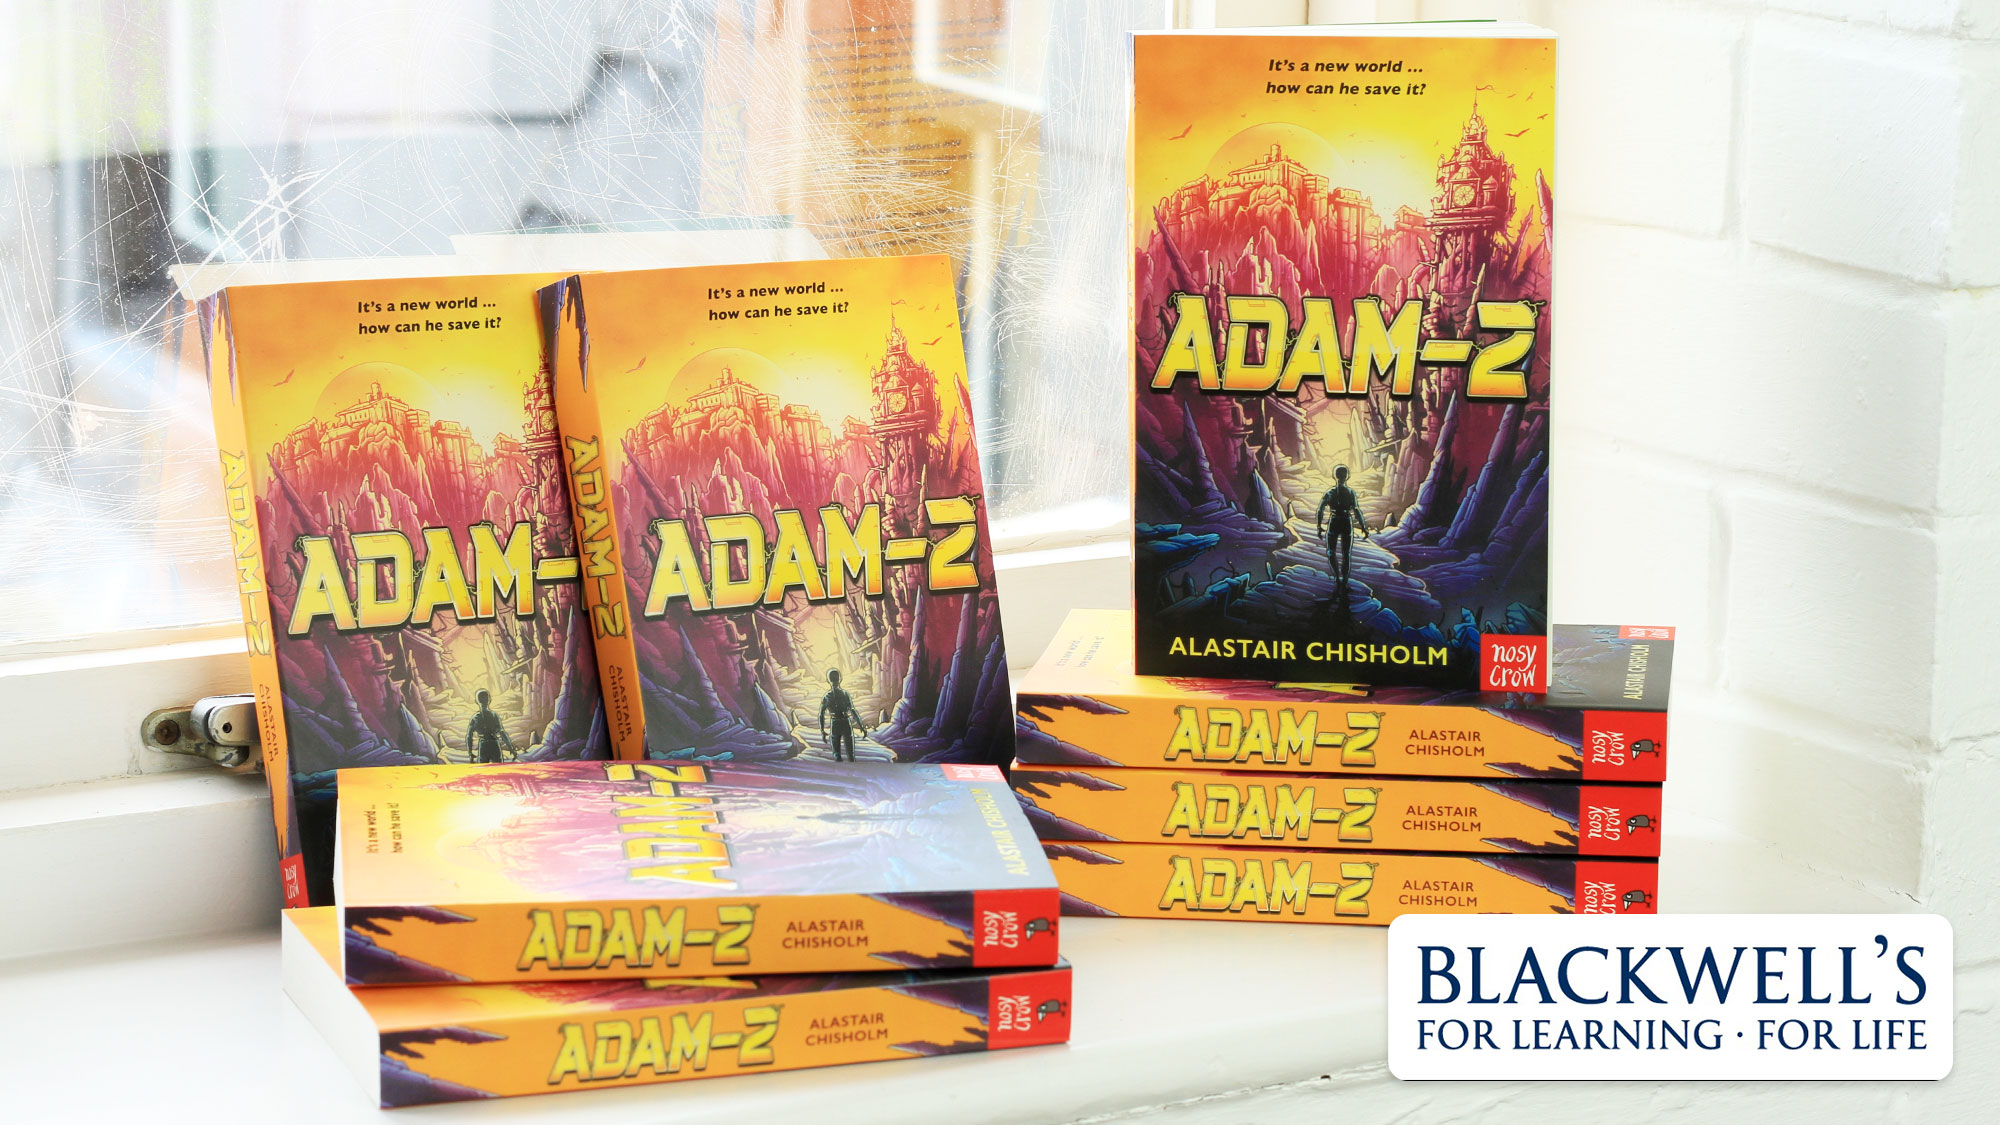 Photo of the book Adam-2 by Alastair Chisholm